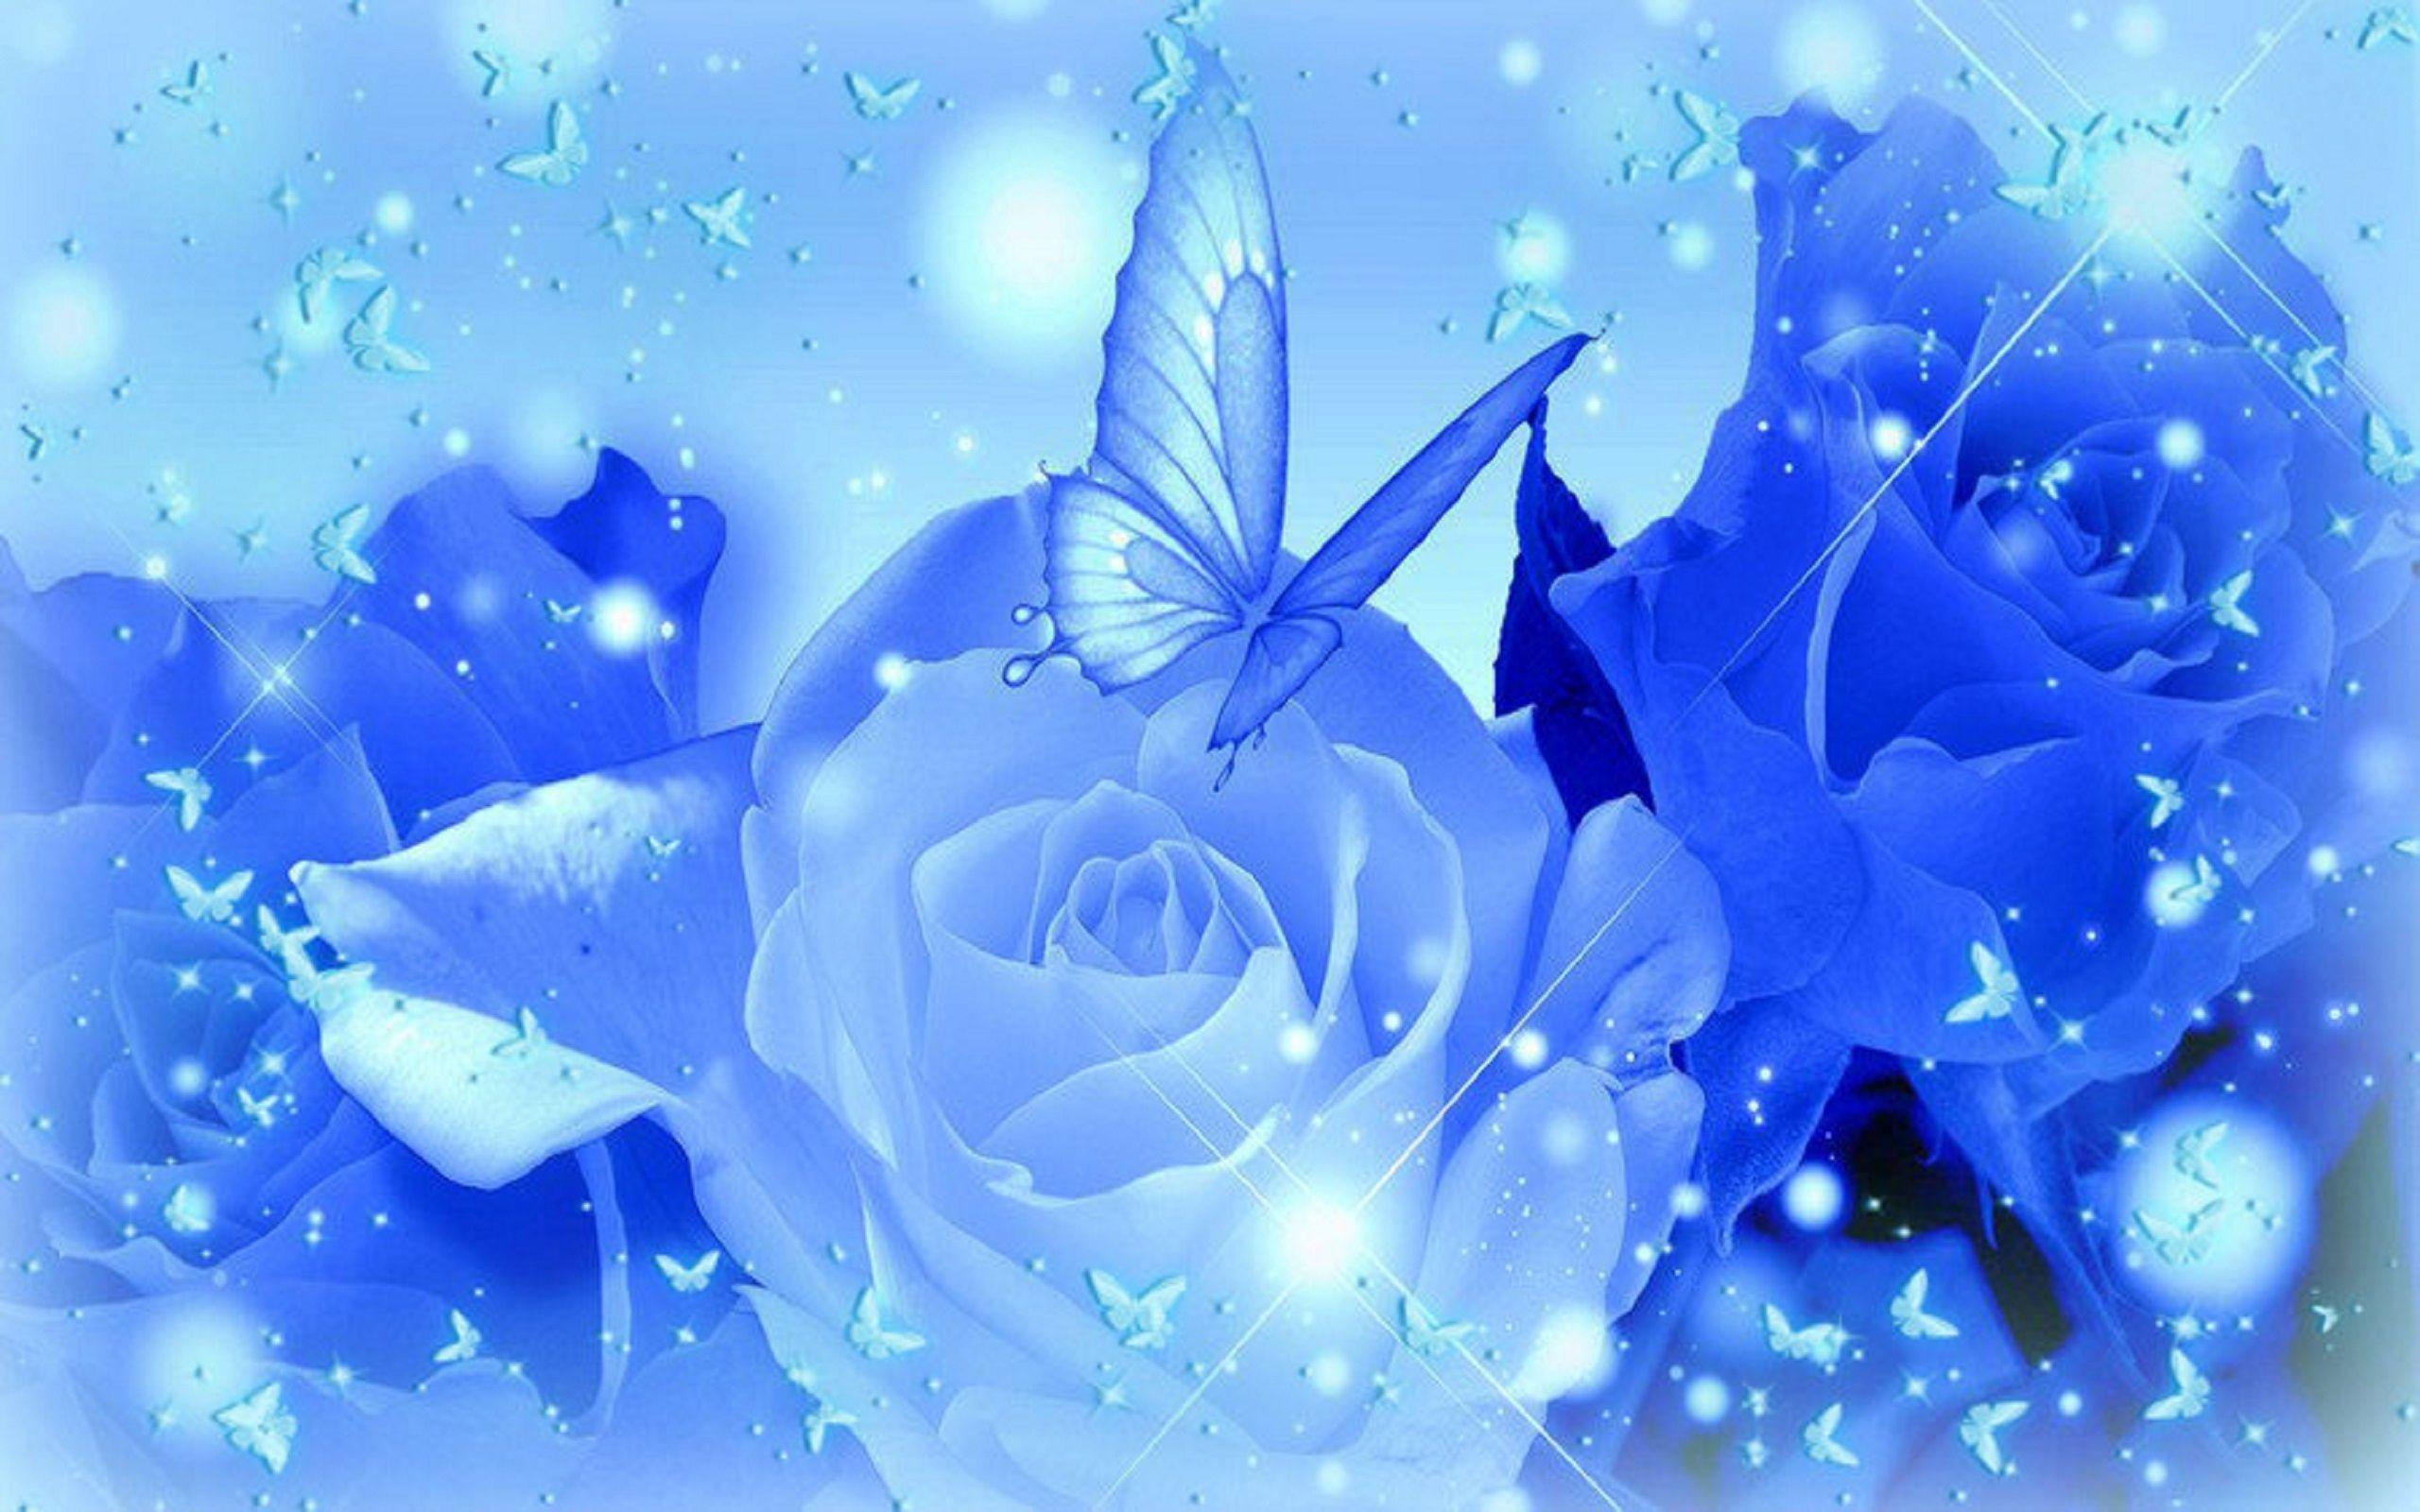 blue rose background wallpaper Search Engine